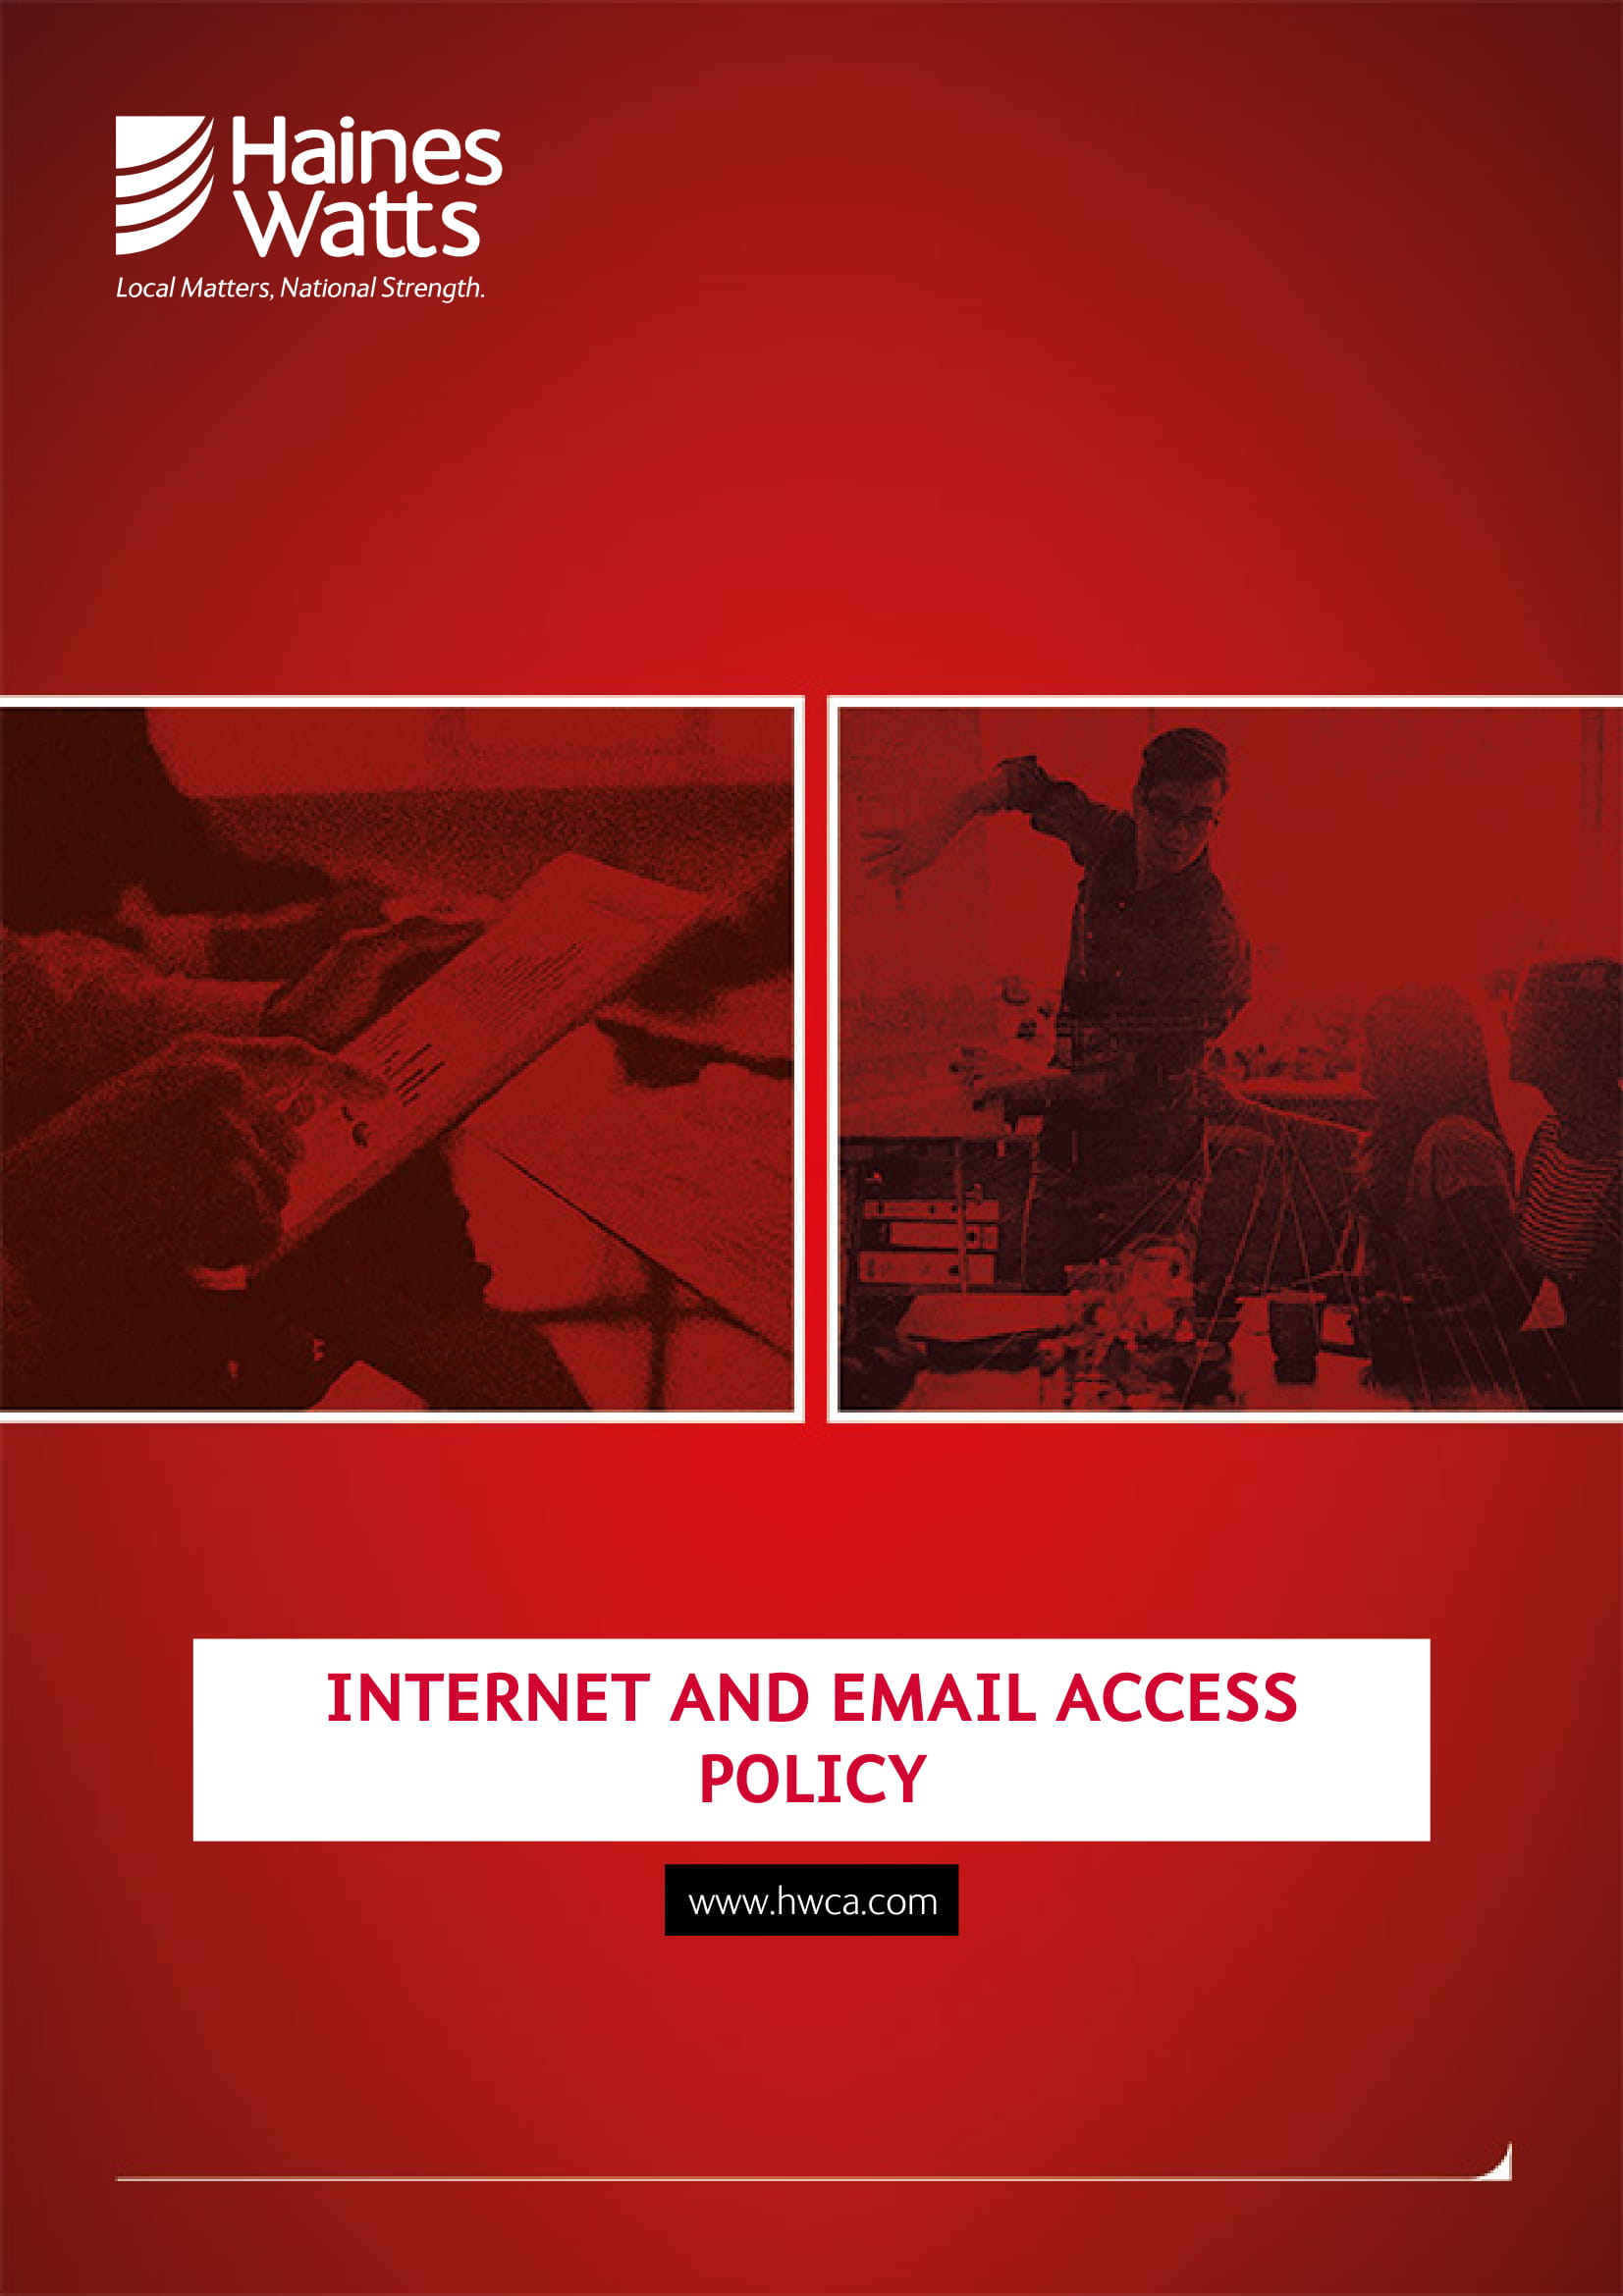 employee email and internet access policy